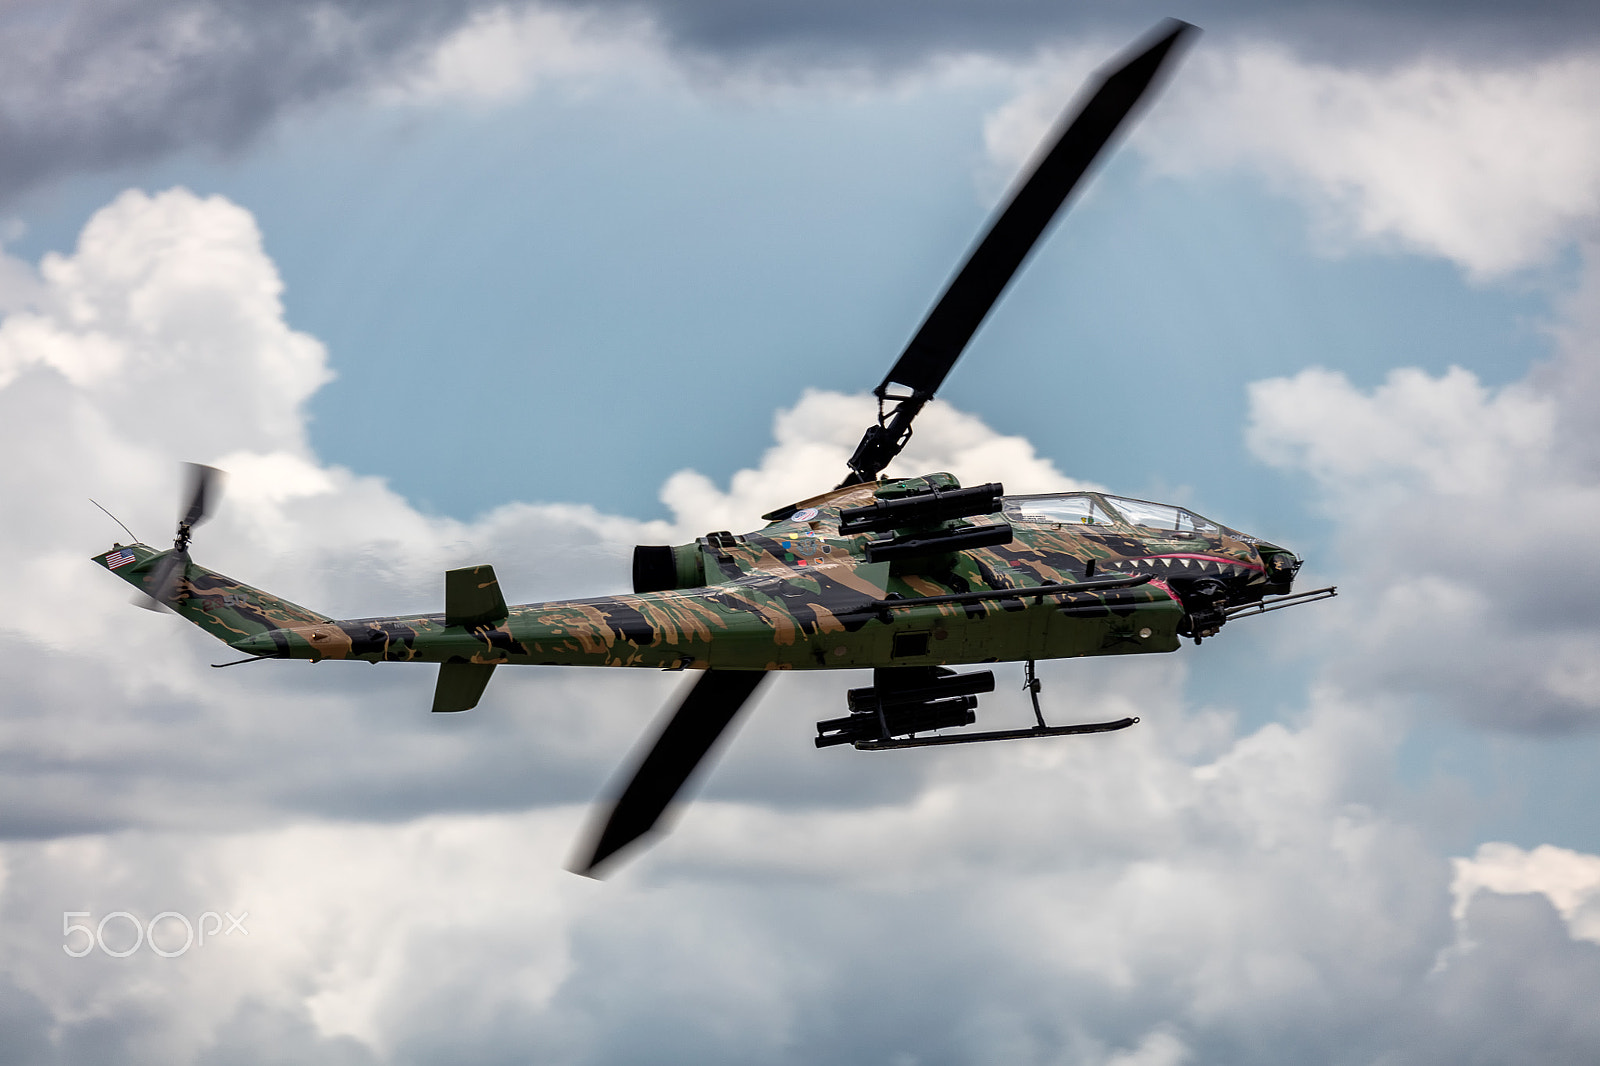 Canon EOS 5DS sample photo. Ah-1f cobra helicopter in flight photography